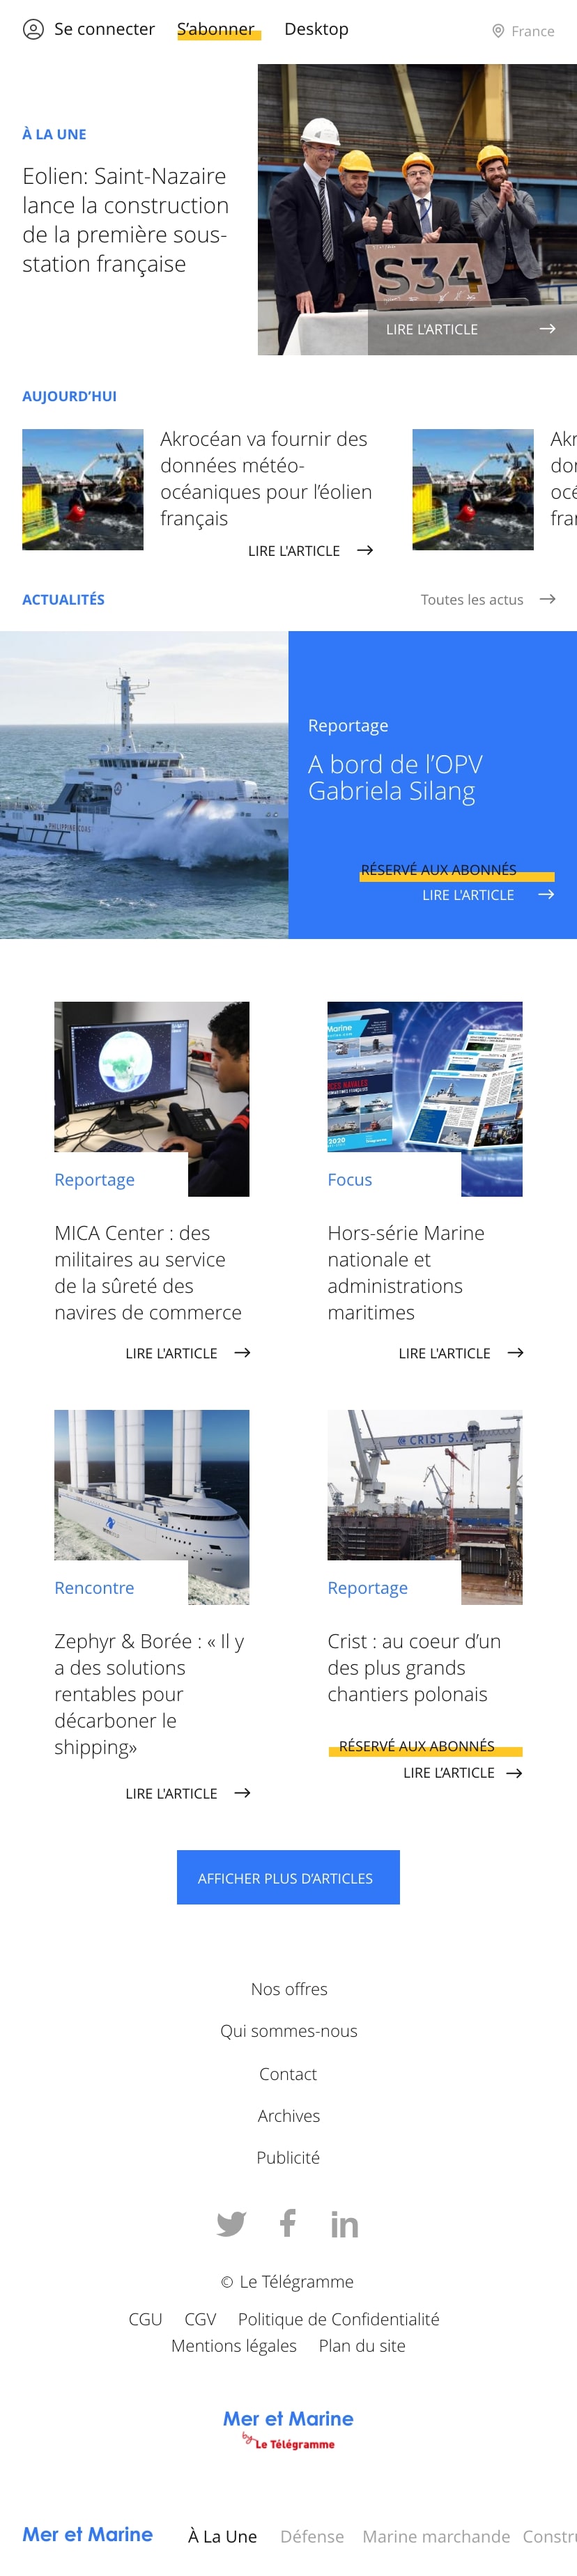 Redesign of the homepage of the website Mer et Marine